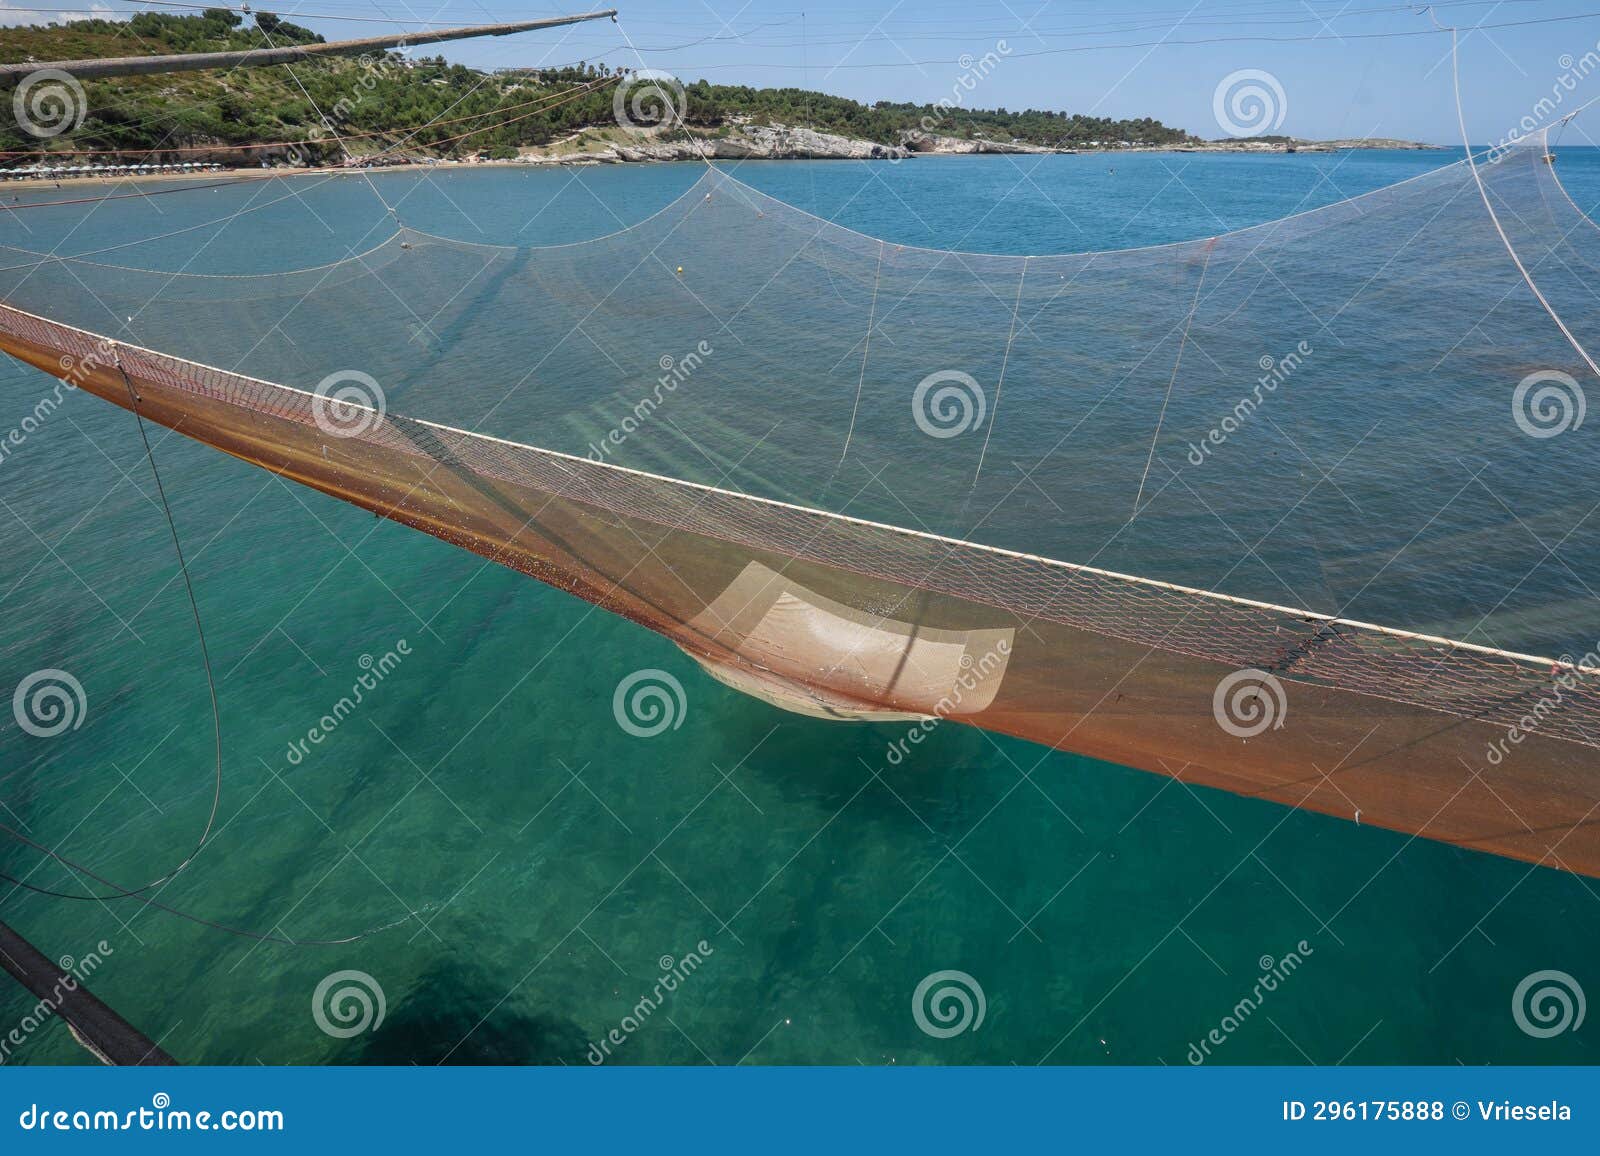 https://thumbs.dreamstime.com/z/huge-fishing-net-pulled-up-ropes-traditional-fishing-trabucco-italy-huge-fishing-net-pulled-up-ropes-296175888.jpg